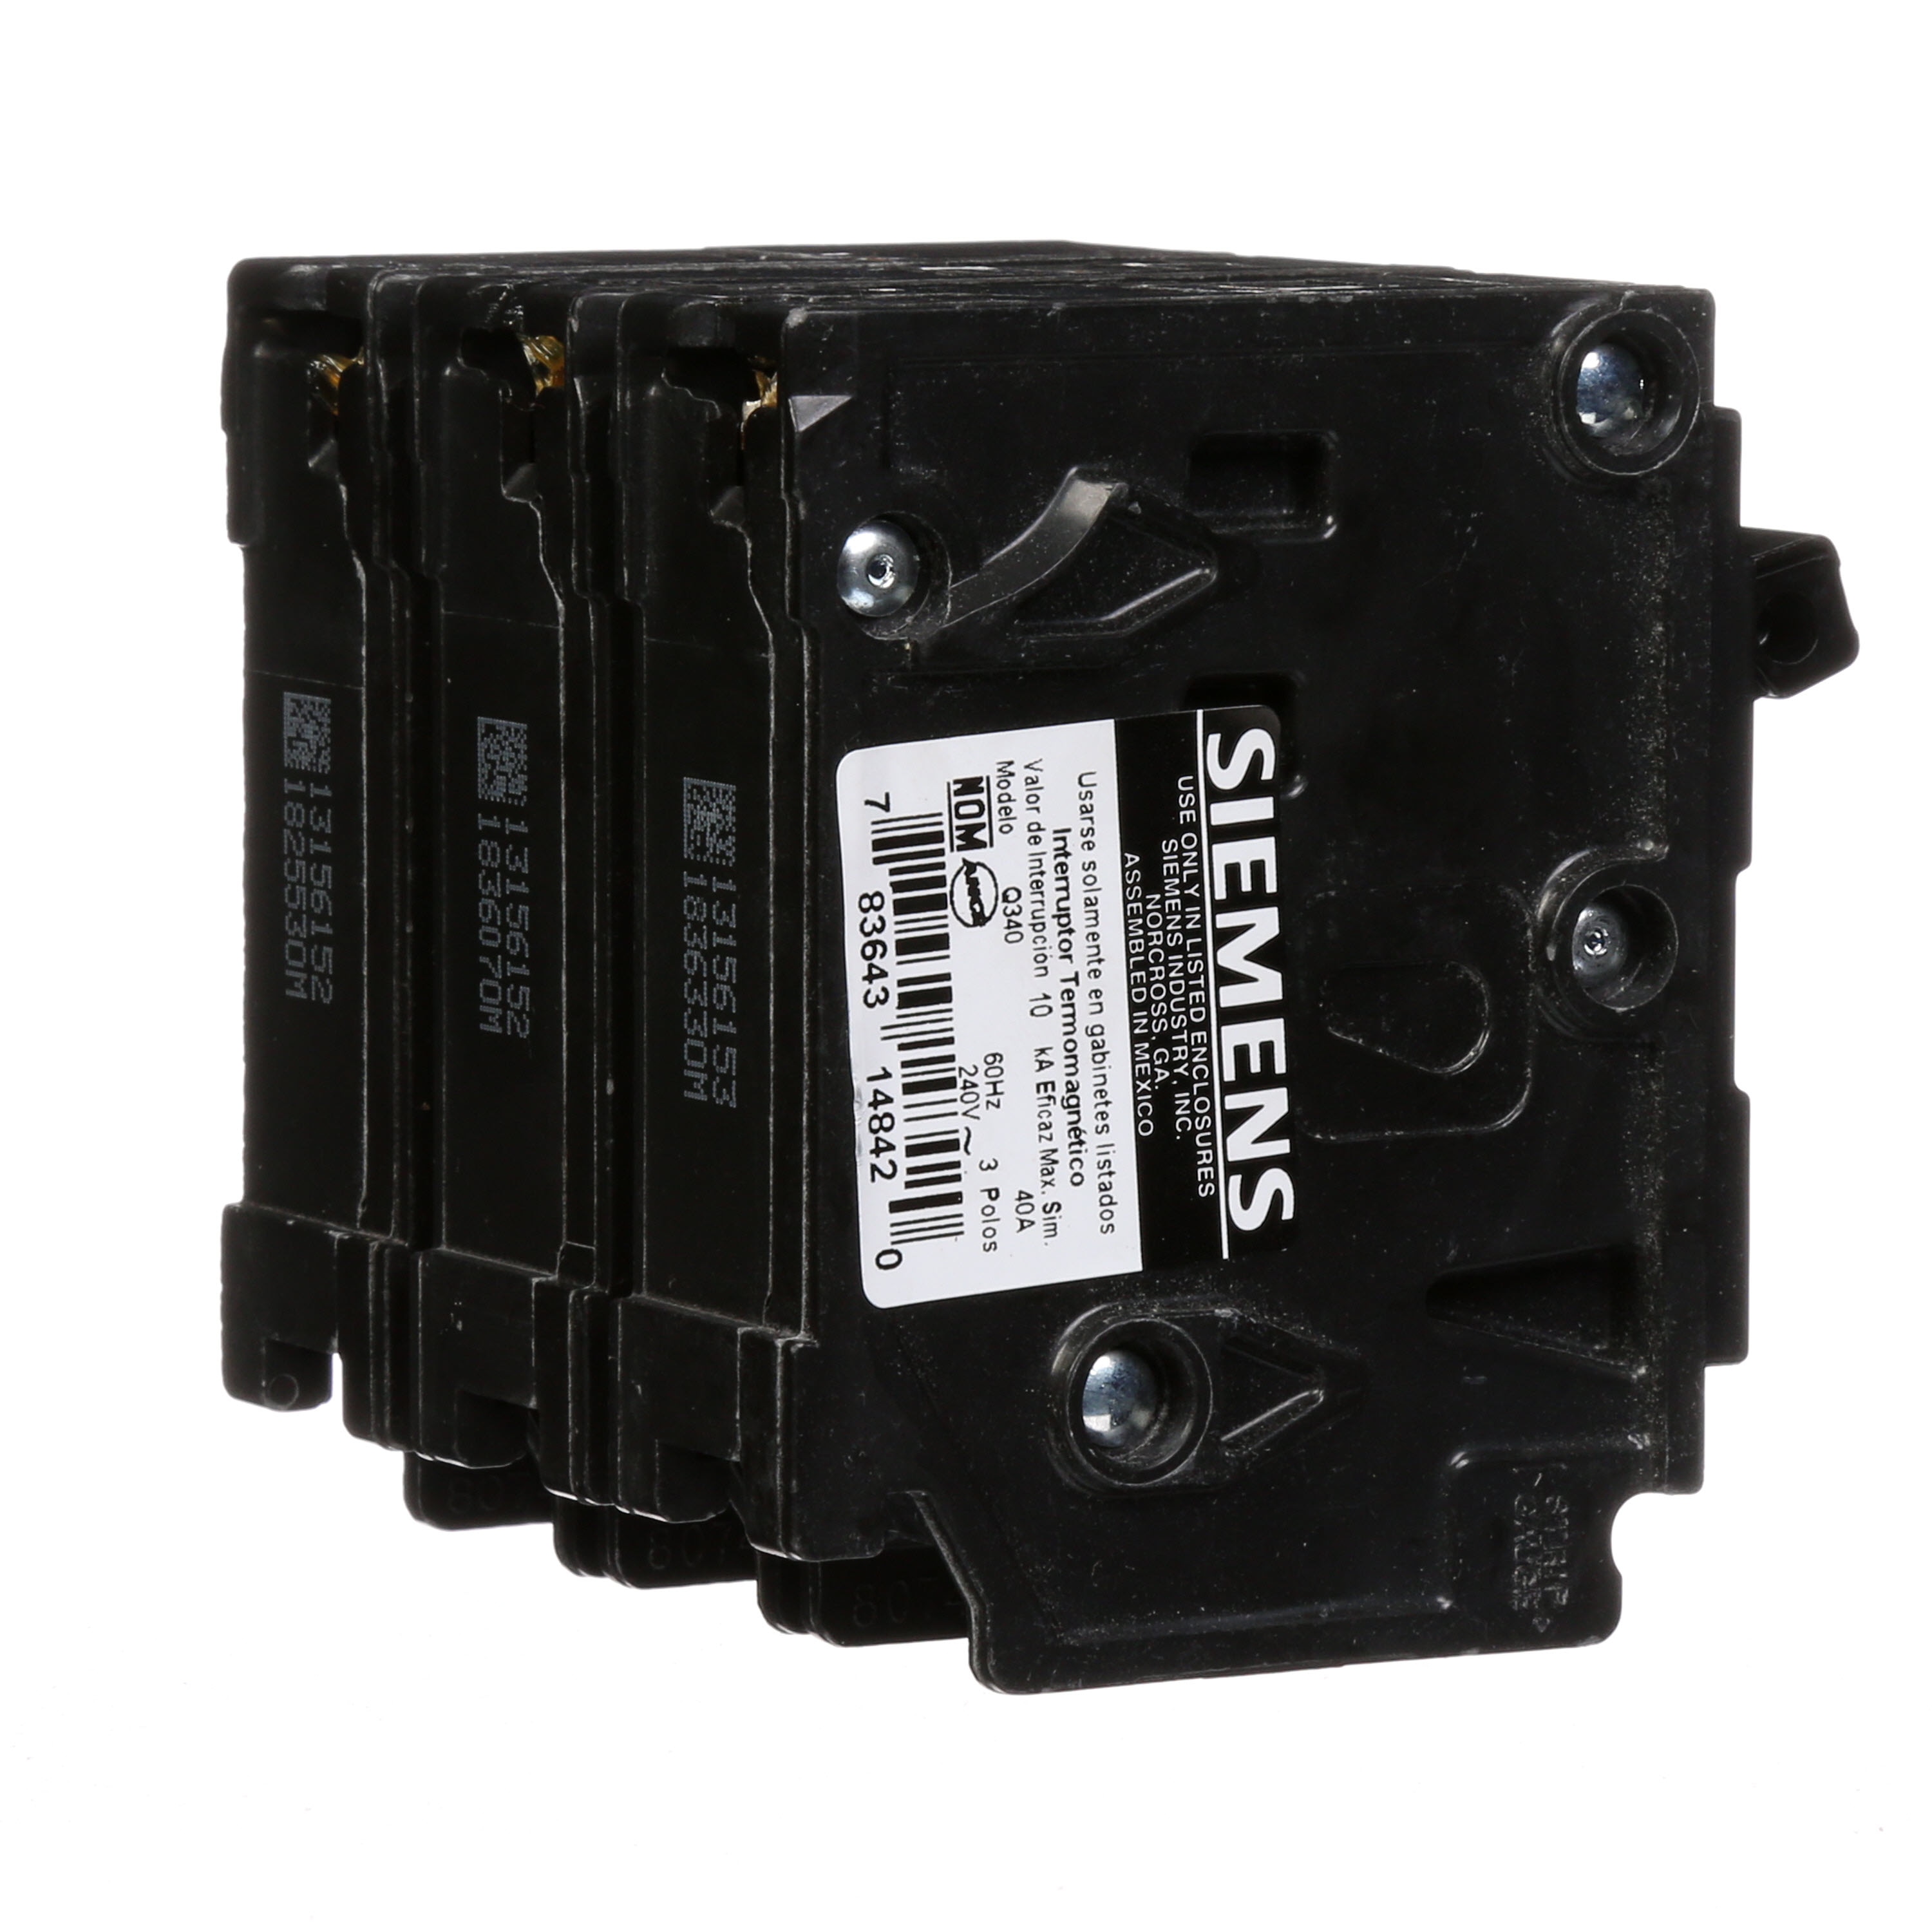 MURRAY MP340  Siemens-Q340-40 amp-3pole-240v-circuit-breaker plug in new pullout